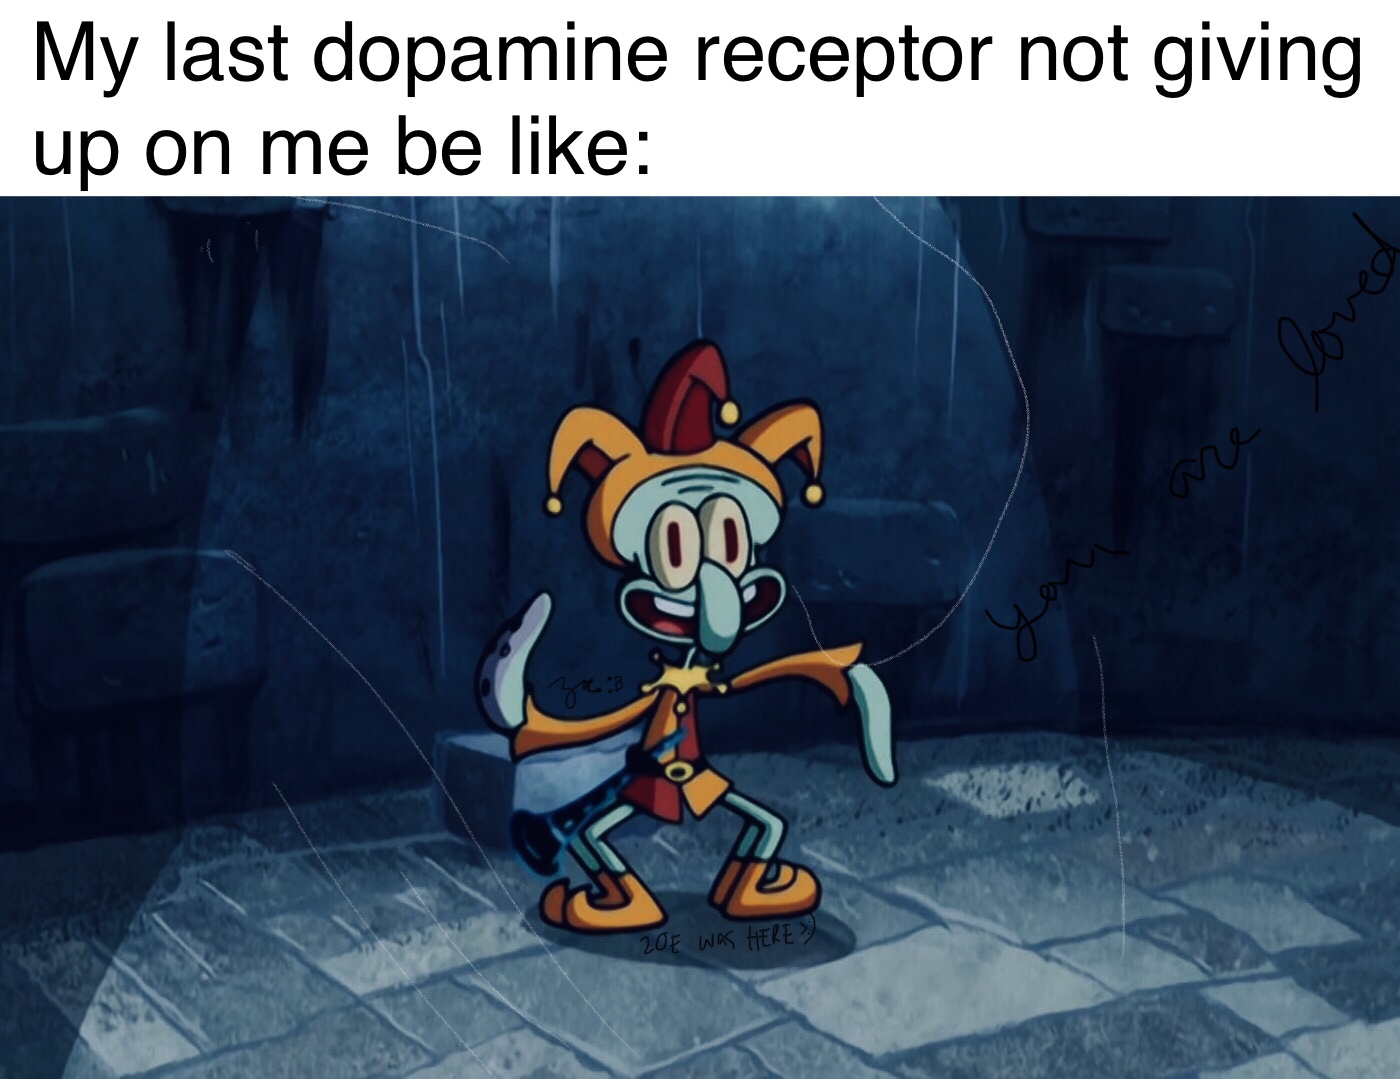 cartoon - My last dopamine receptor not giving up on me be loved ne zo 200 was Here